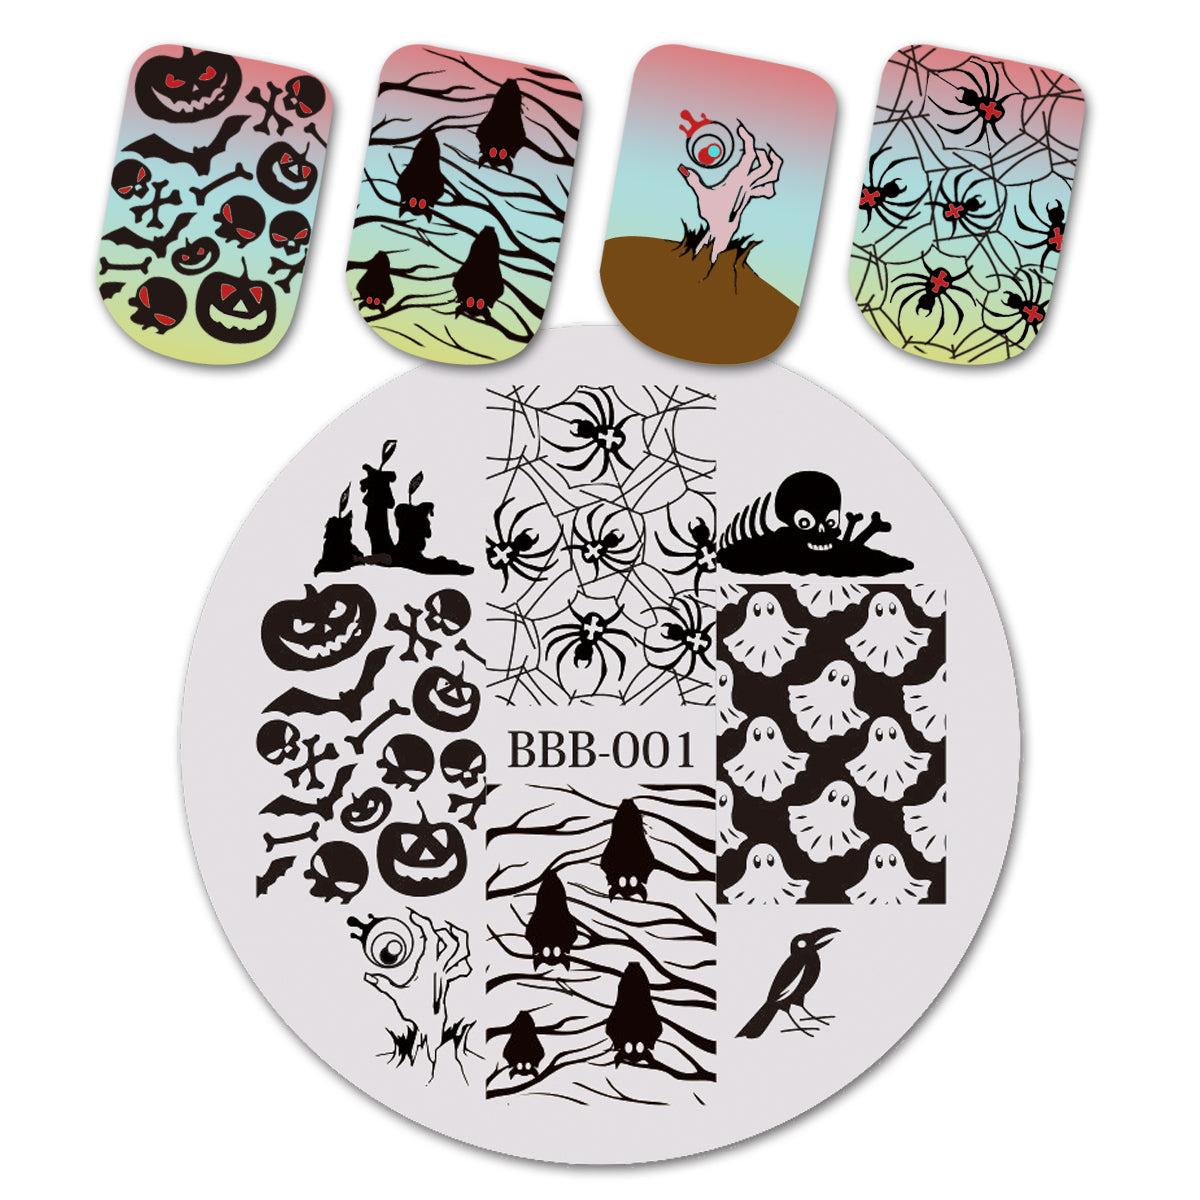 Creating Monster Zombie vs Icons Stamping Plate